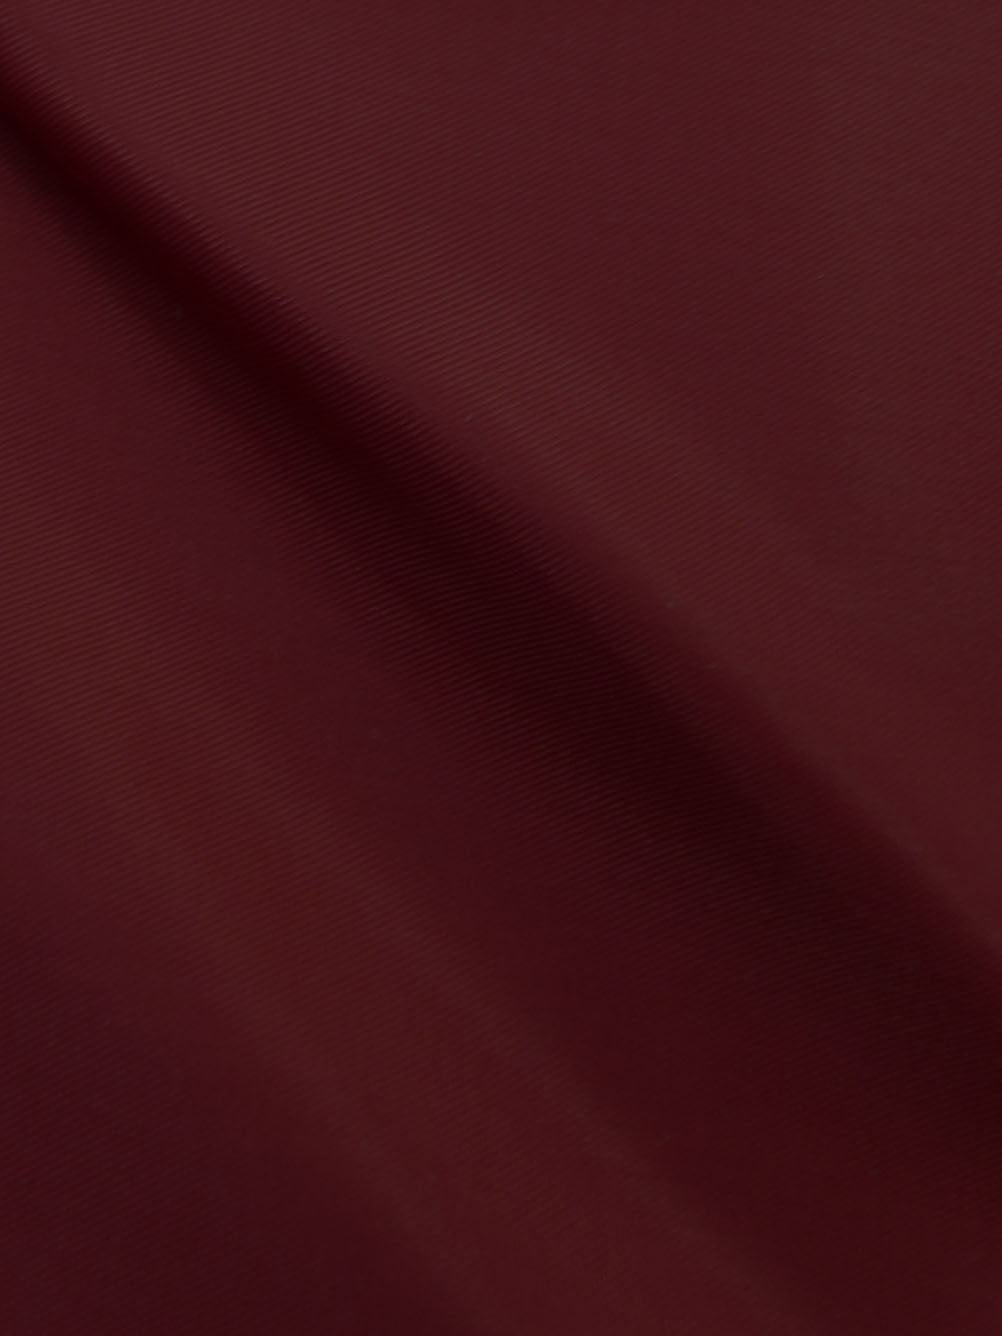 Maroon Polyester Lining Fabric - Eclipse